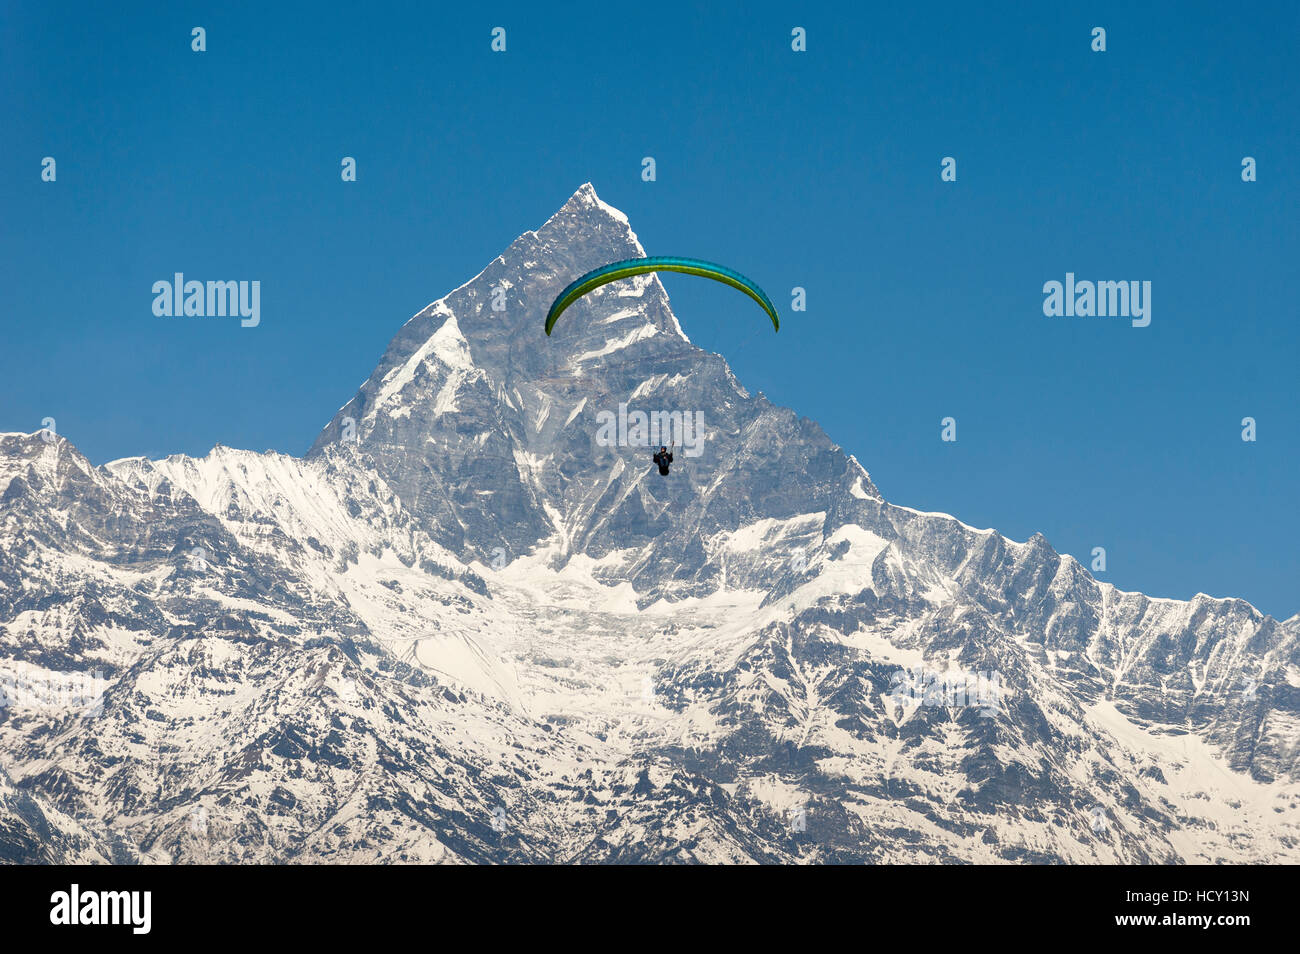 A paraglider hangs in the air with the dramatic peak of Machapuchare (Fishtail mountain) in the distance, Nepal Stock Photo